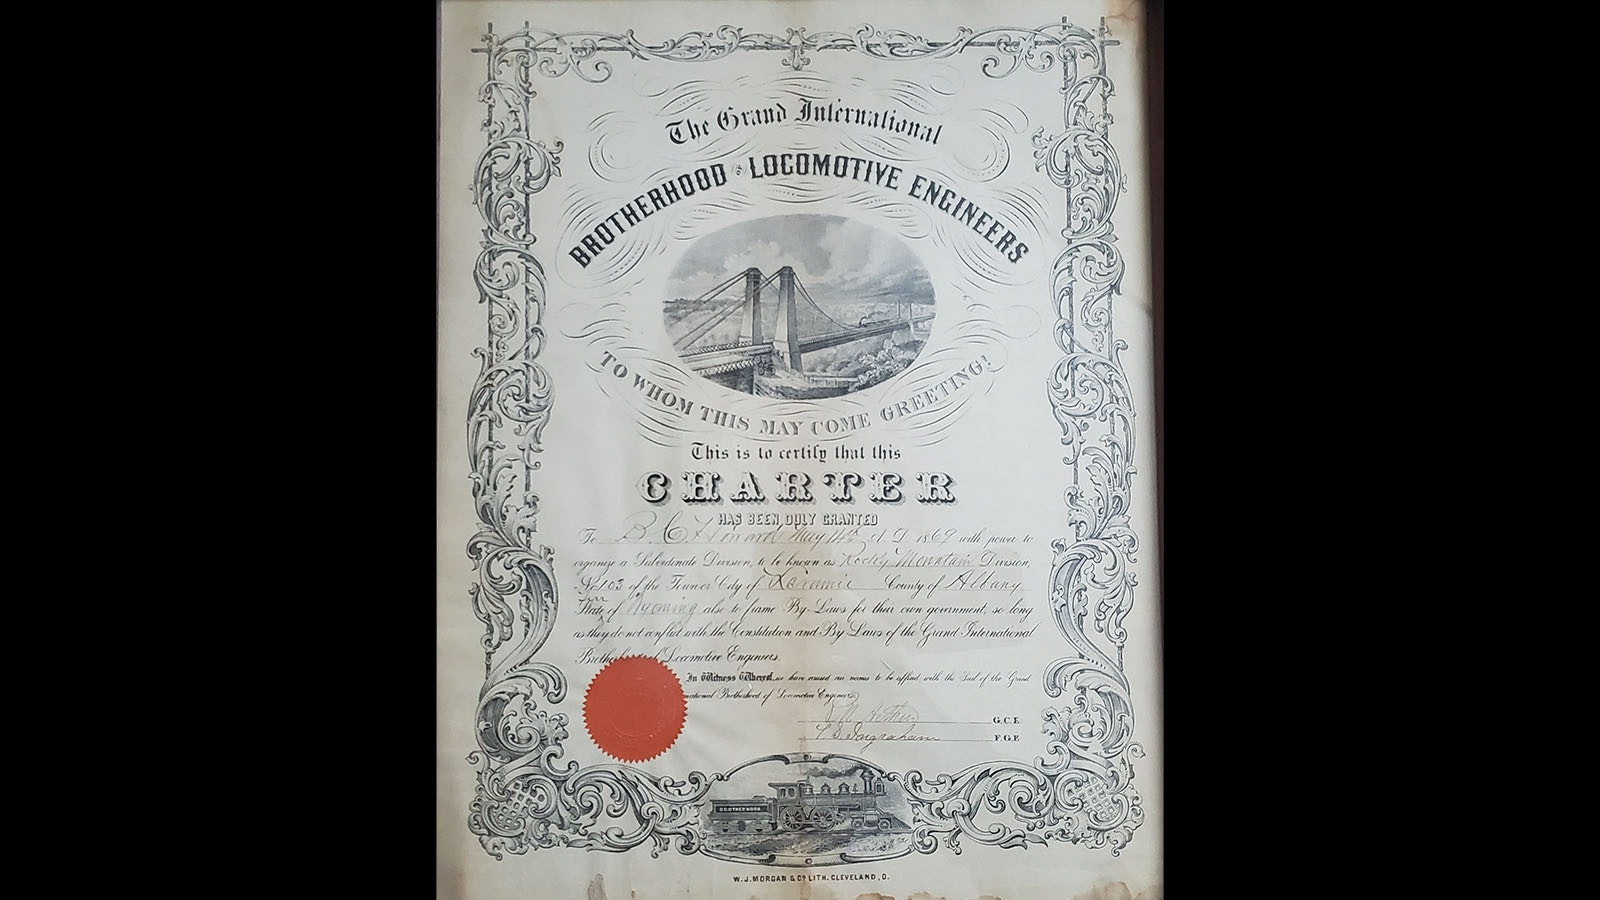 The charter for the Brotherhood of Locomotive Engineers Division 103 was signed on May 14, 1869.